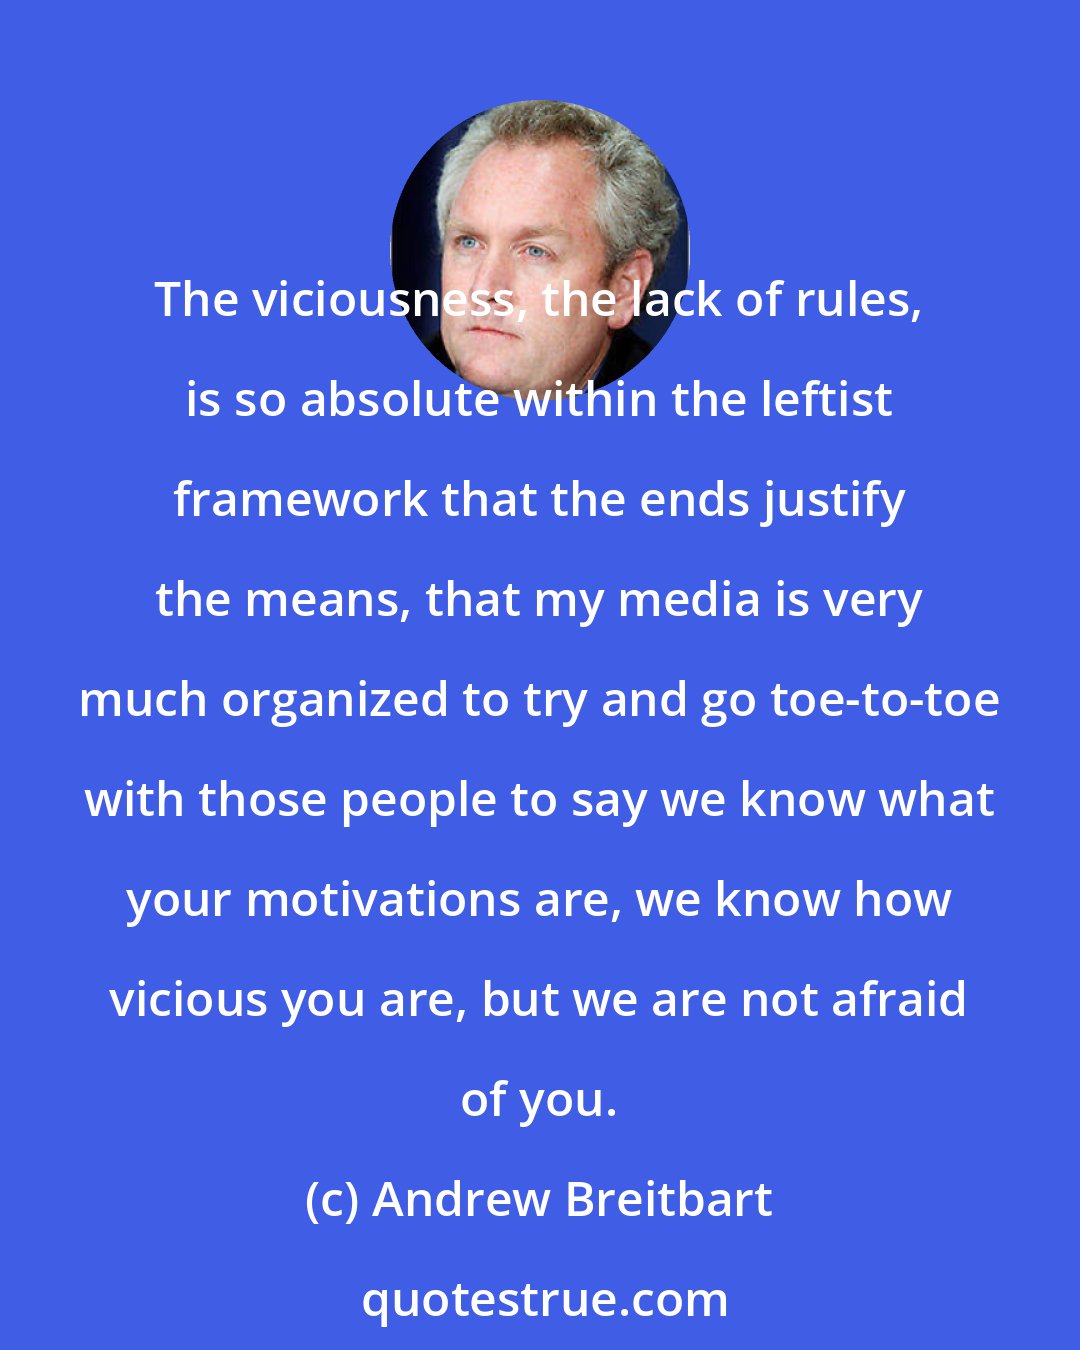 Andrew Breitbart: The viciousness, the lack of rules, is so absolute within the leftist framework that the ends justify the means, that my media is very much organized to try and go toe-to-toe with those people to say we know what your motivations are, we know how vicious you are, but we are not afraid of you.